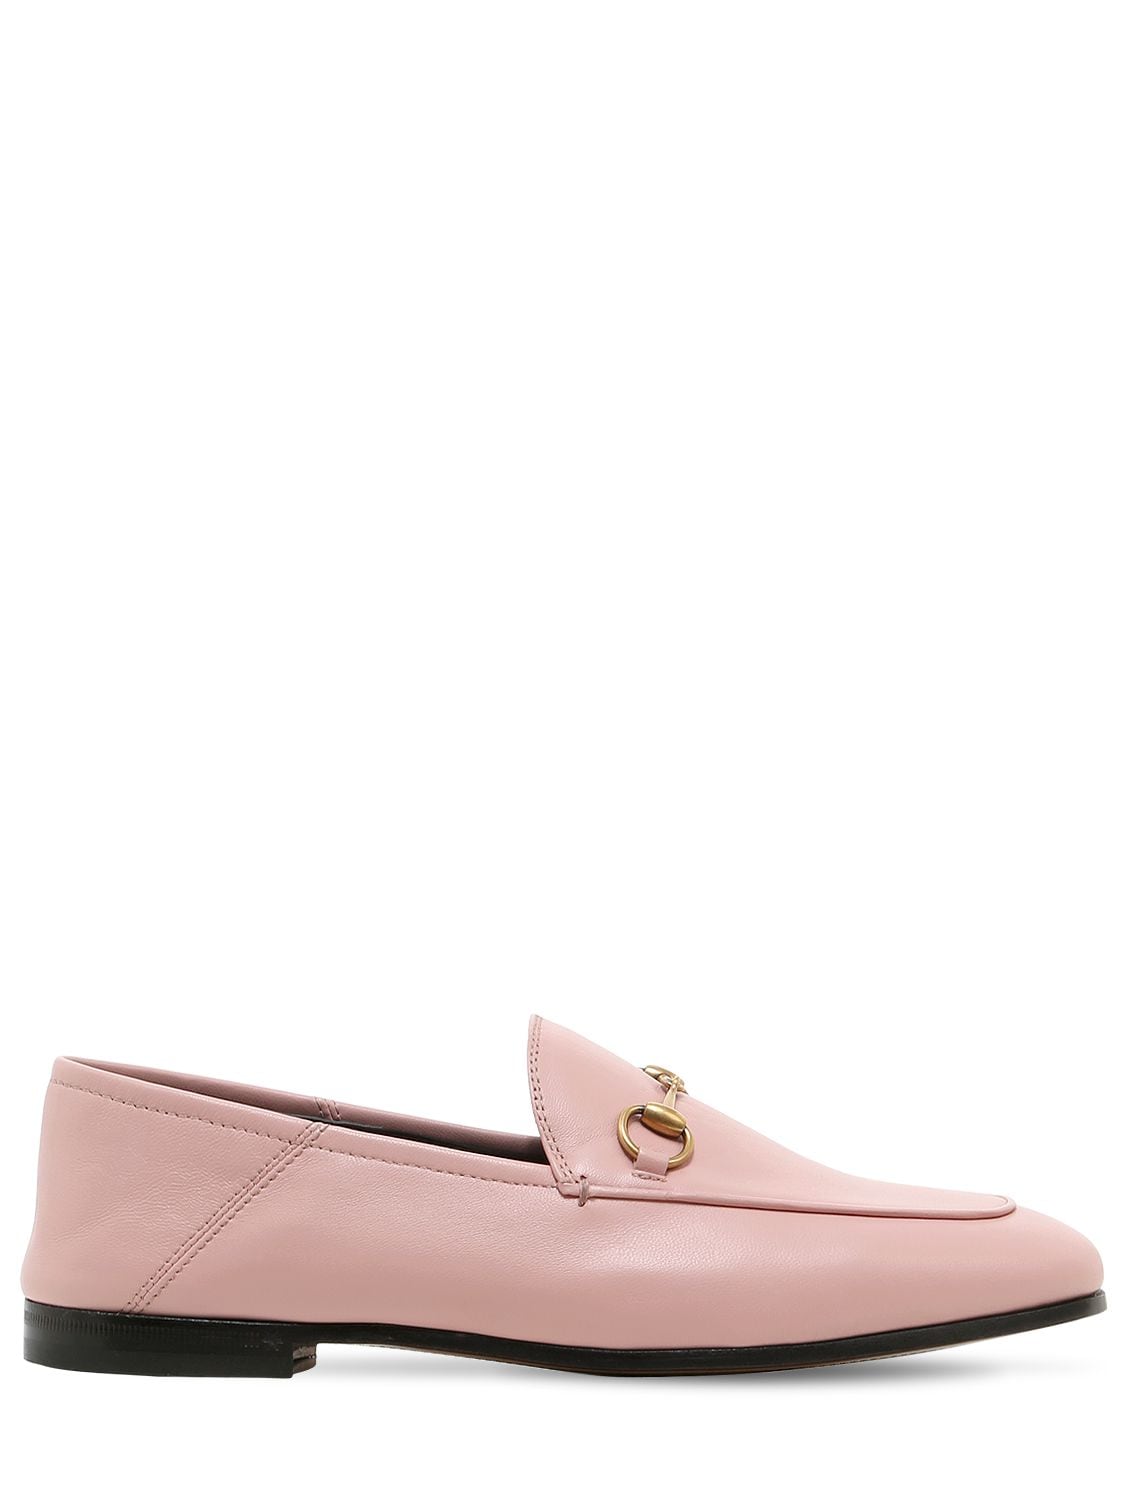 Gucci 10mm Brixton Leather Loafers In Light Pink